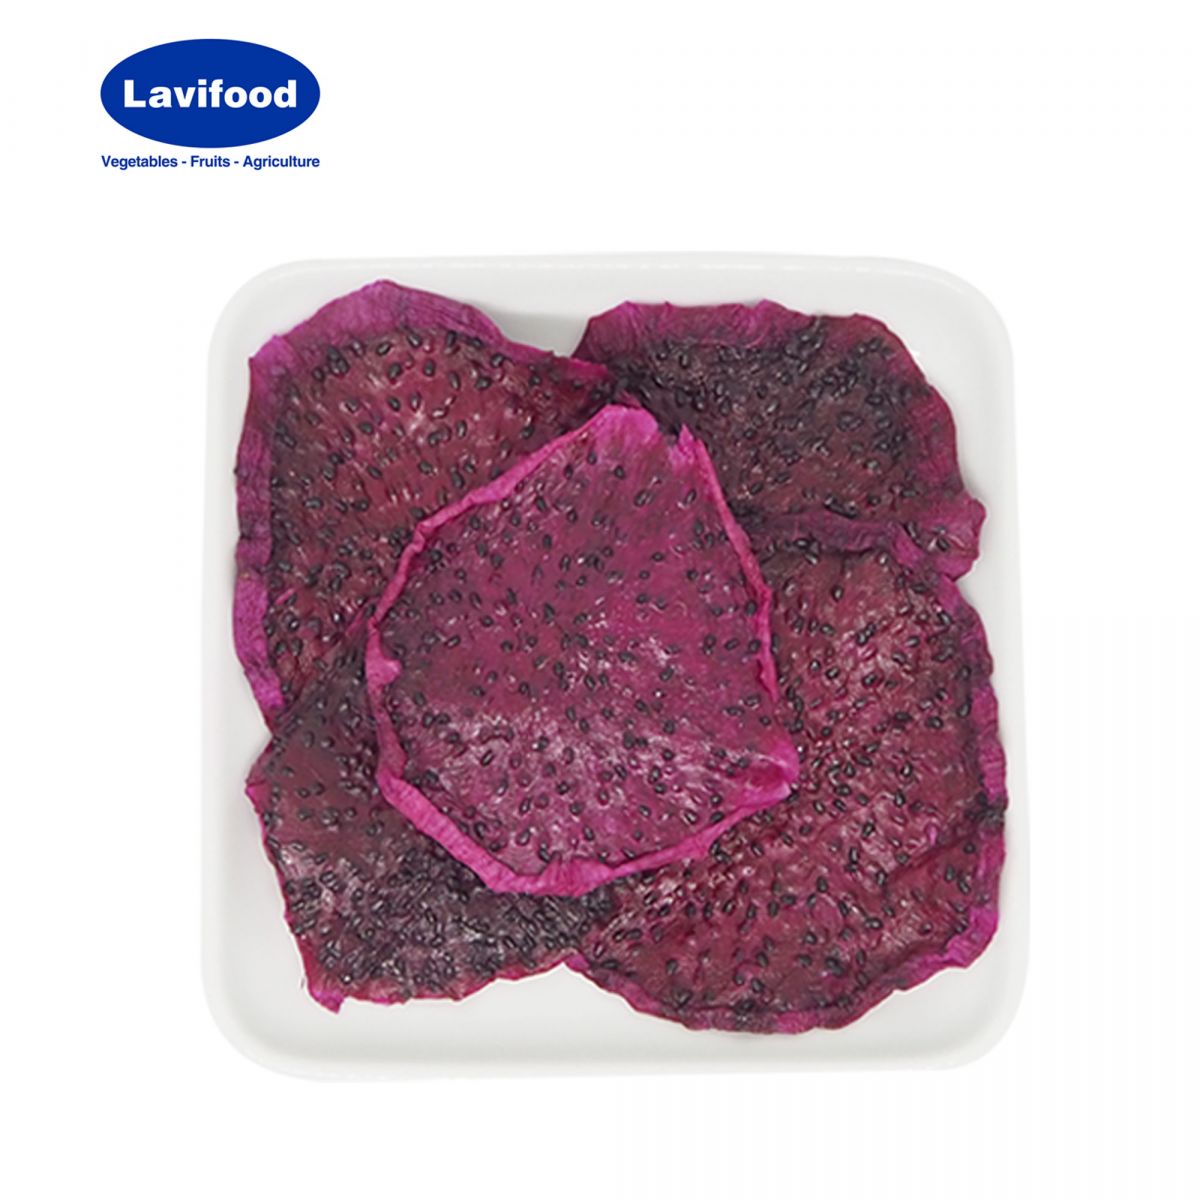 https://lavifood.com/en/products/dried-fruit-vegetables/dried-red-dragon-fruit